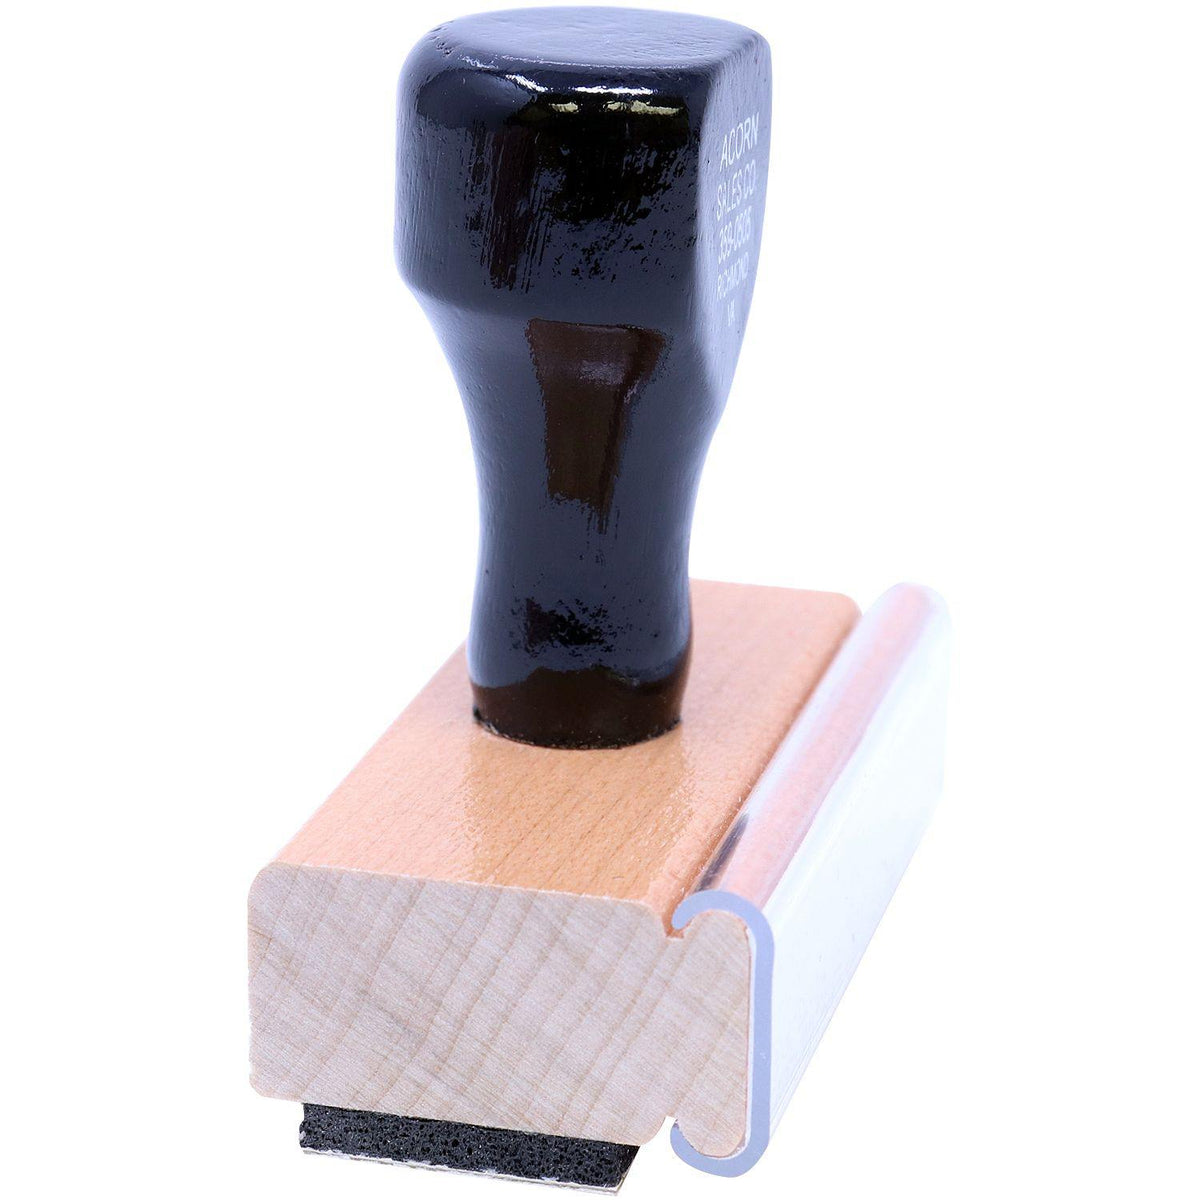 Side View of Community Property Rubber Stamp at an Angle